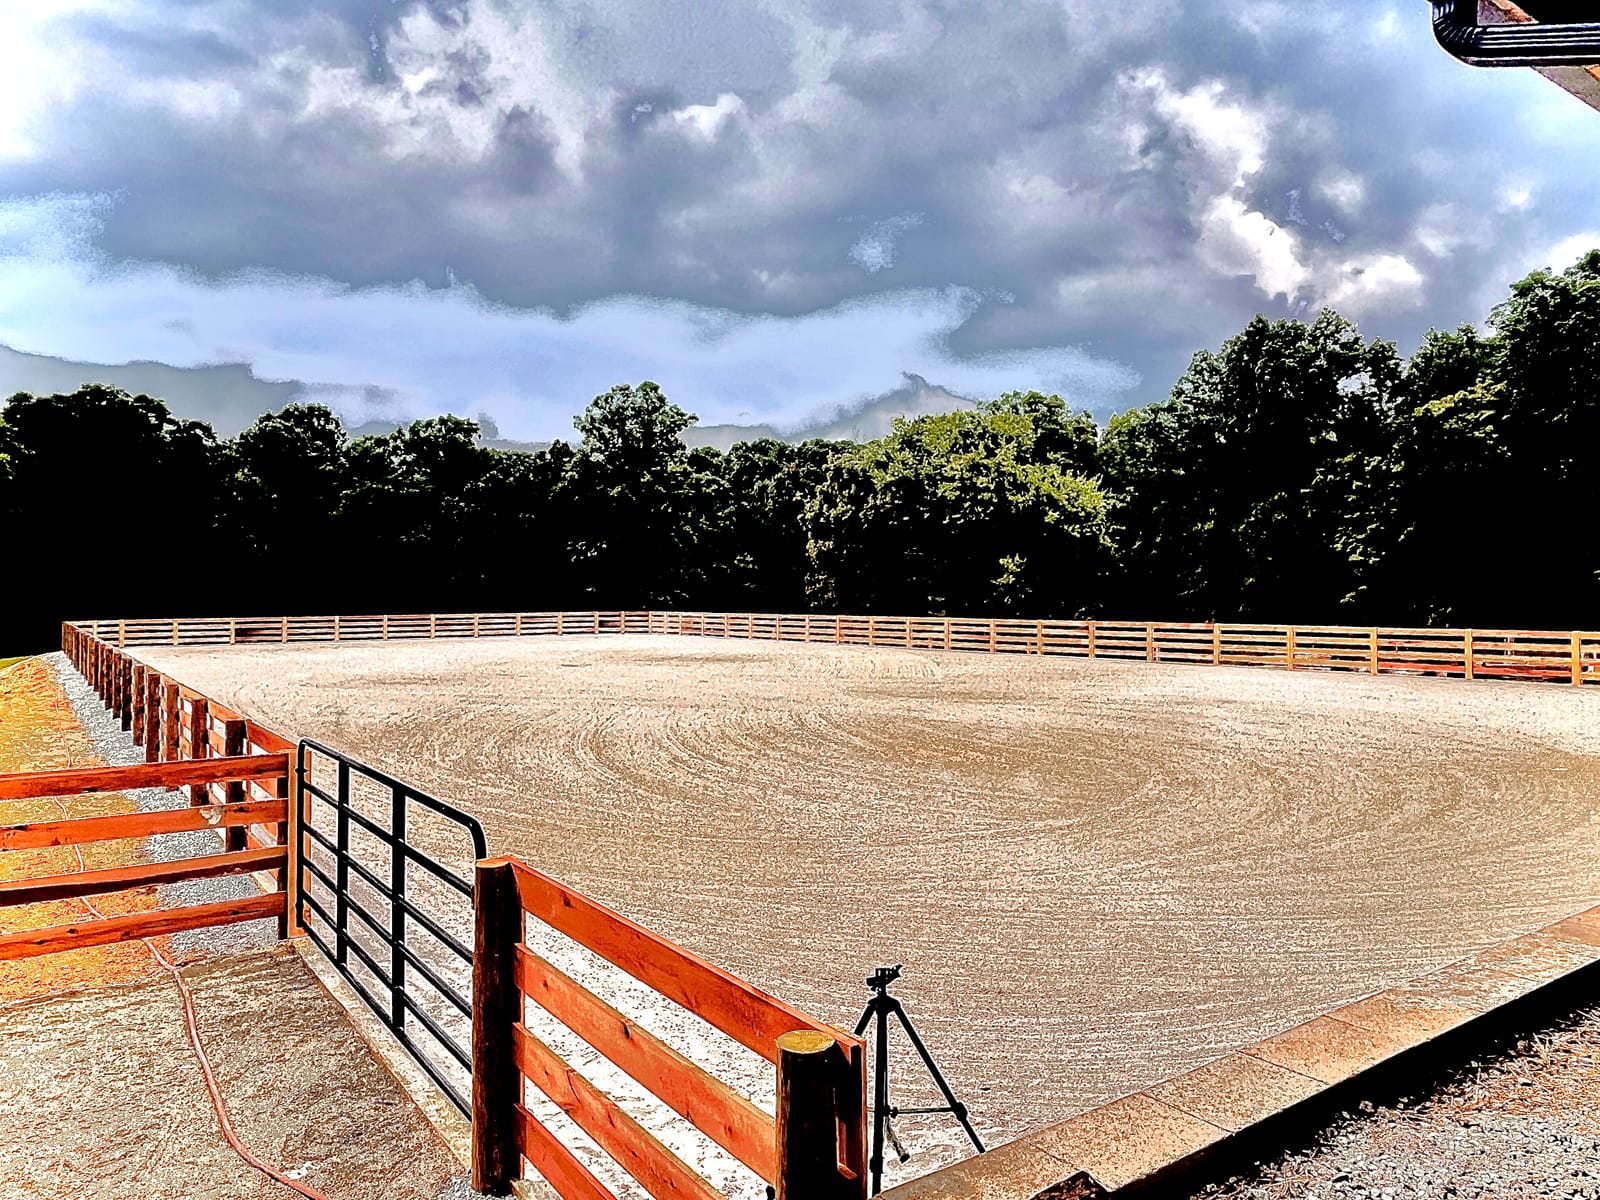 Horse Arena with gates and Fences